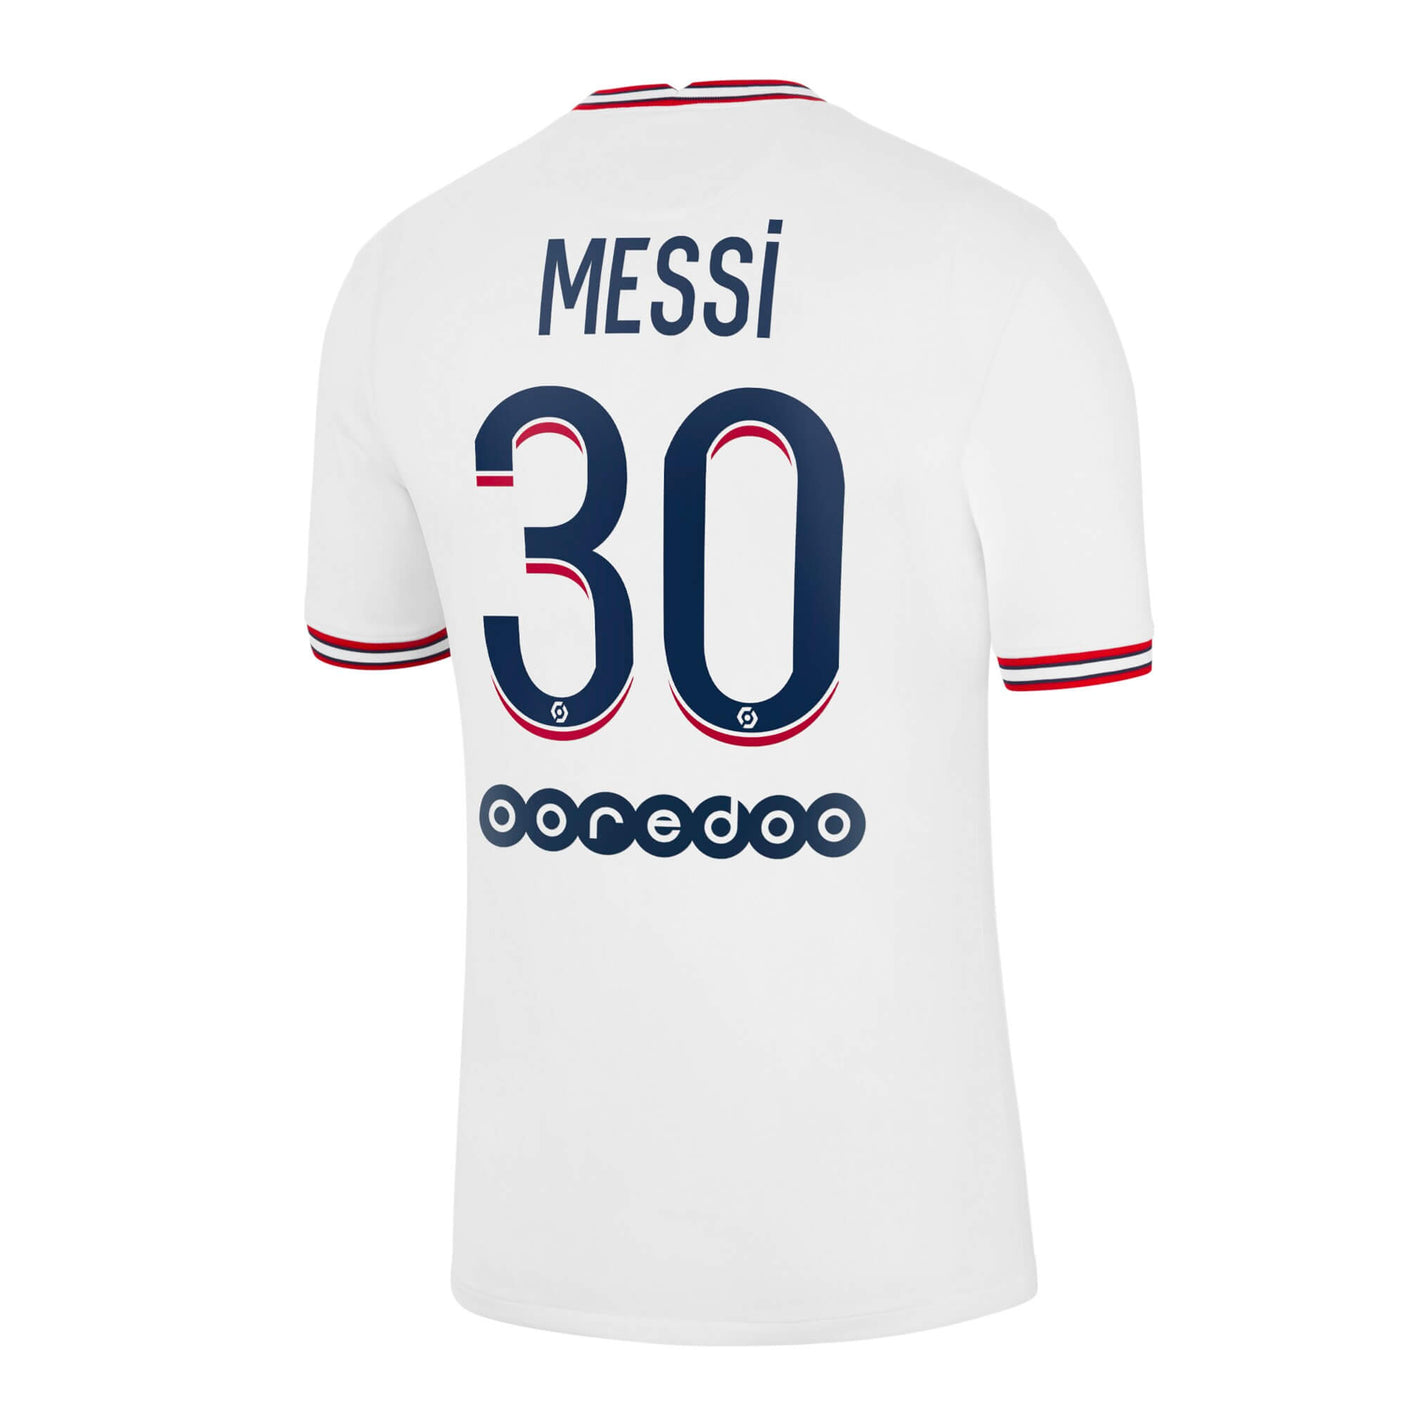 2021/22 Lionel Messi #30 PSG Fourth Jersey Official Nameset